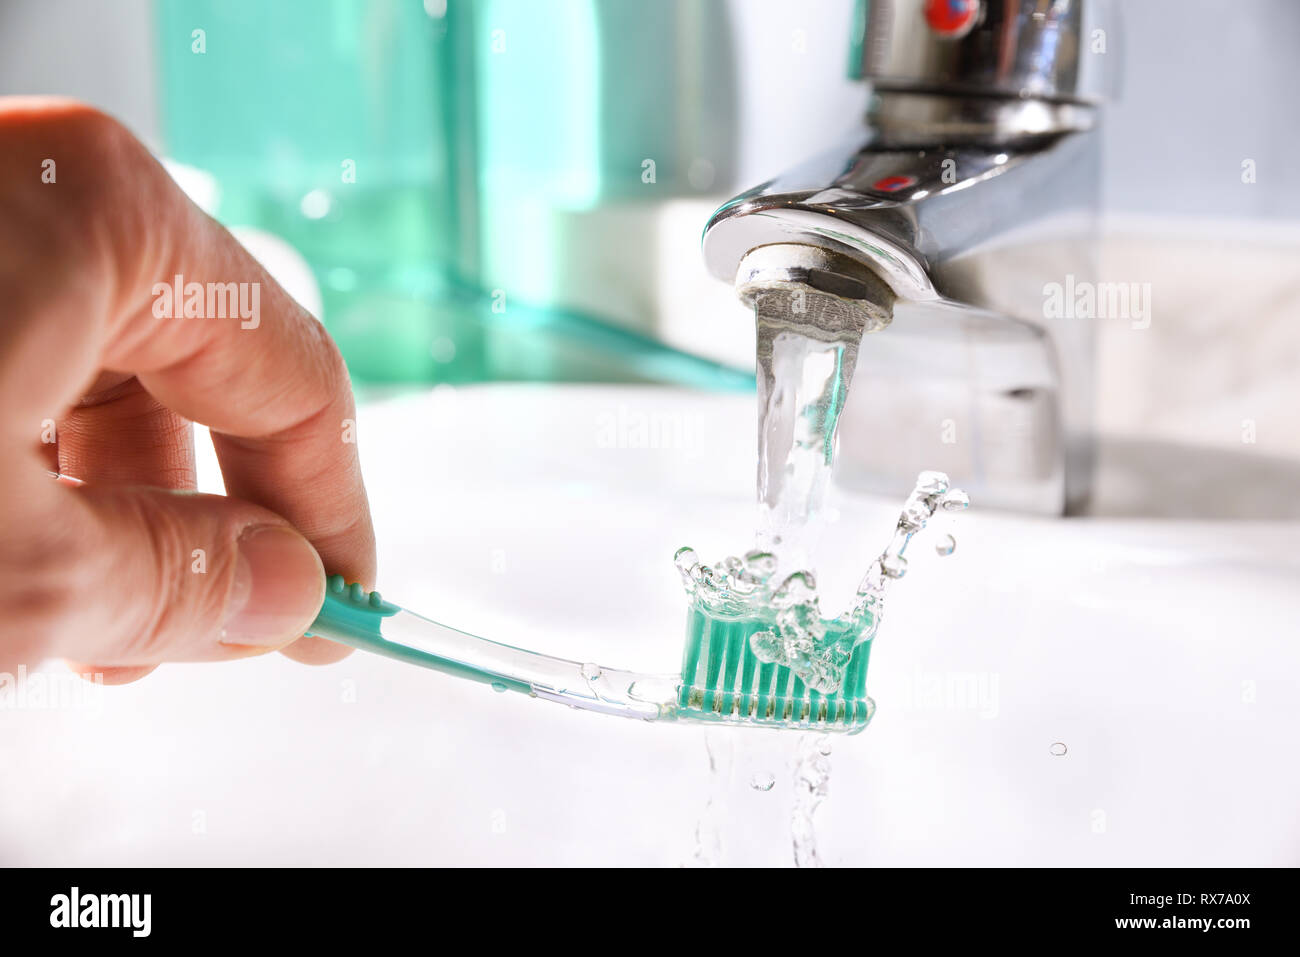 Daily cleaning of the toothbrush after use in the bathroom sink. Horizontal composition. Front view. Stock Photo